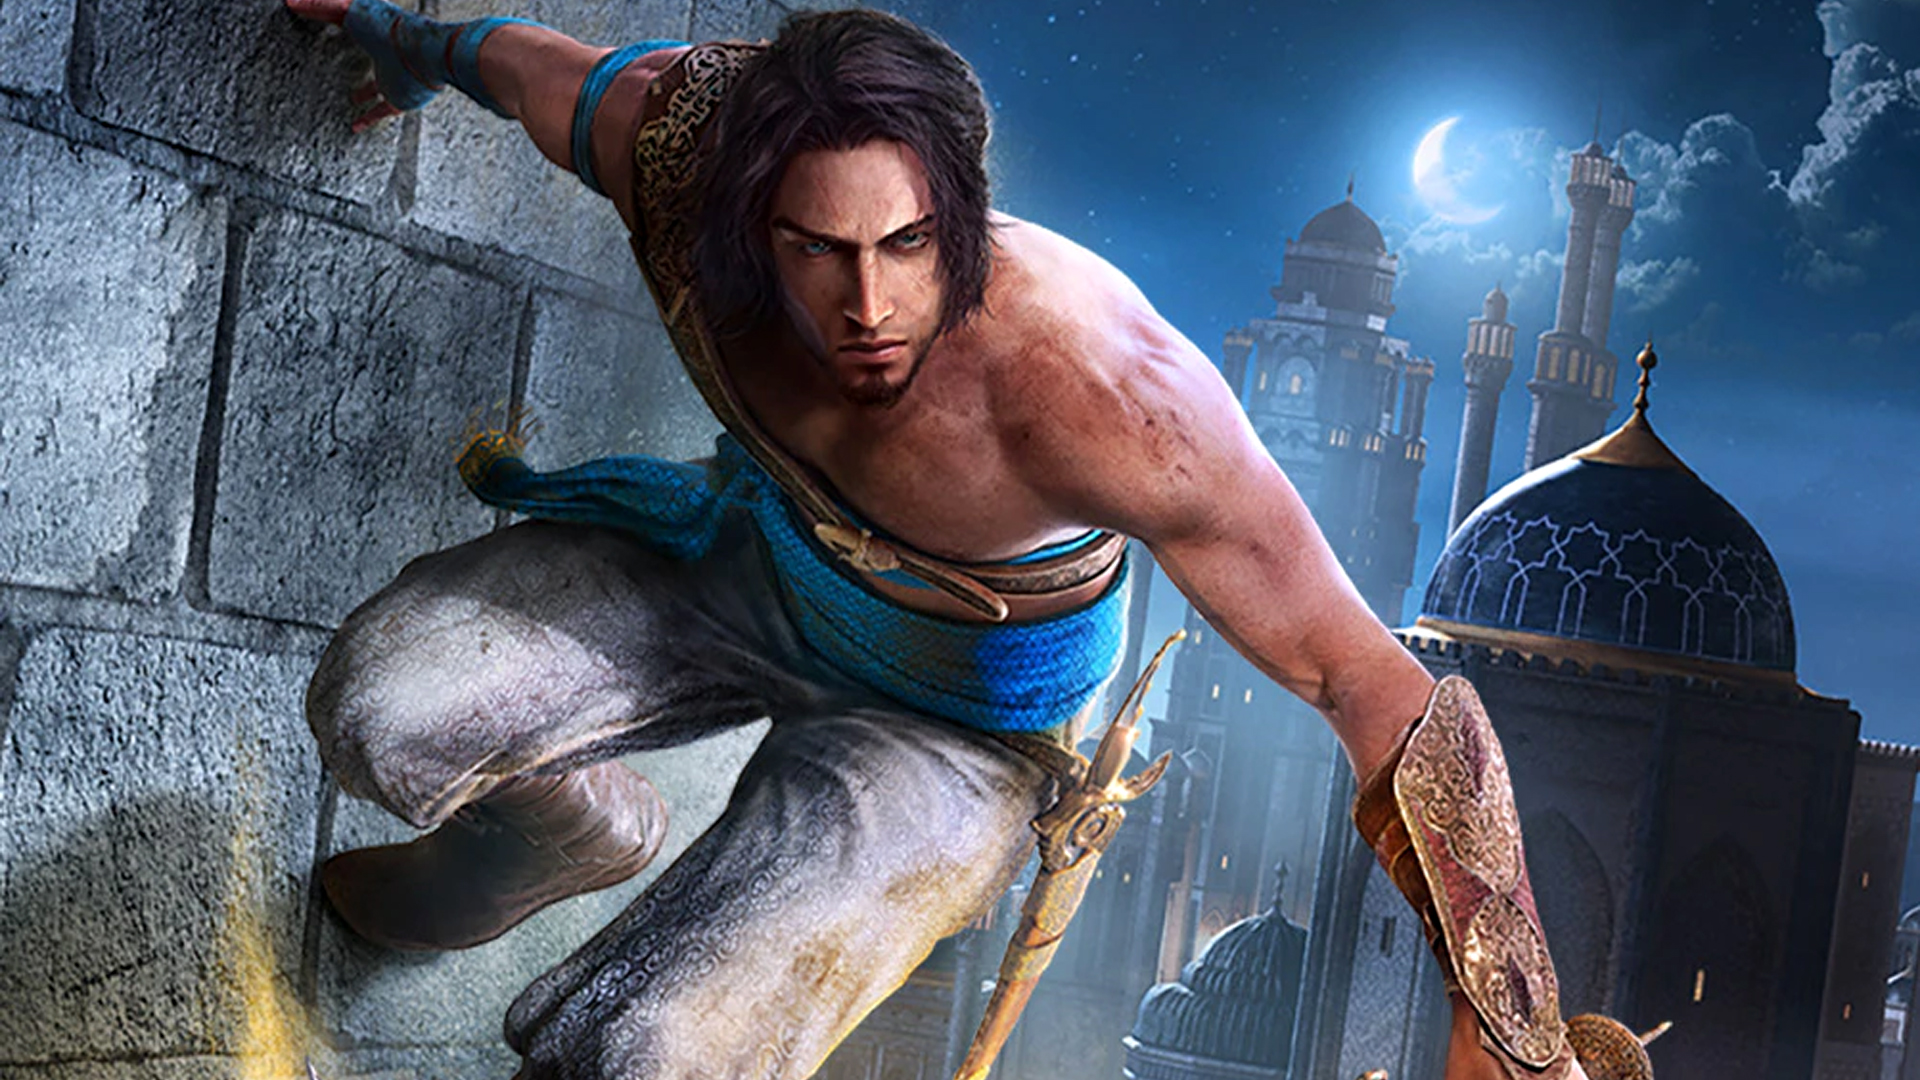 Prince of Persia remake delayed again as dev changes